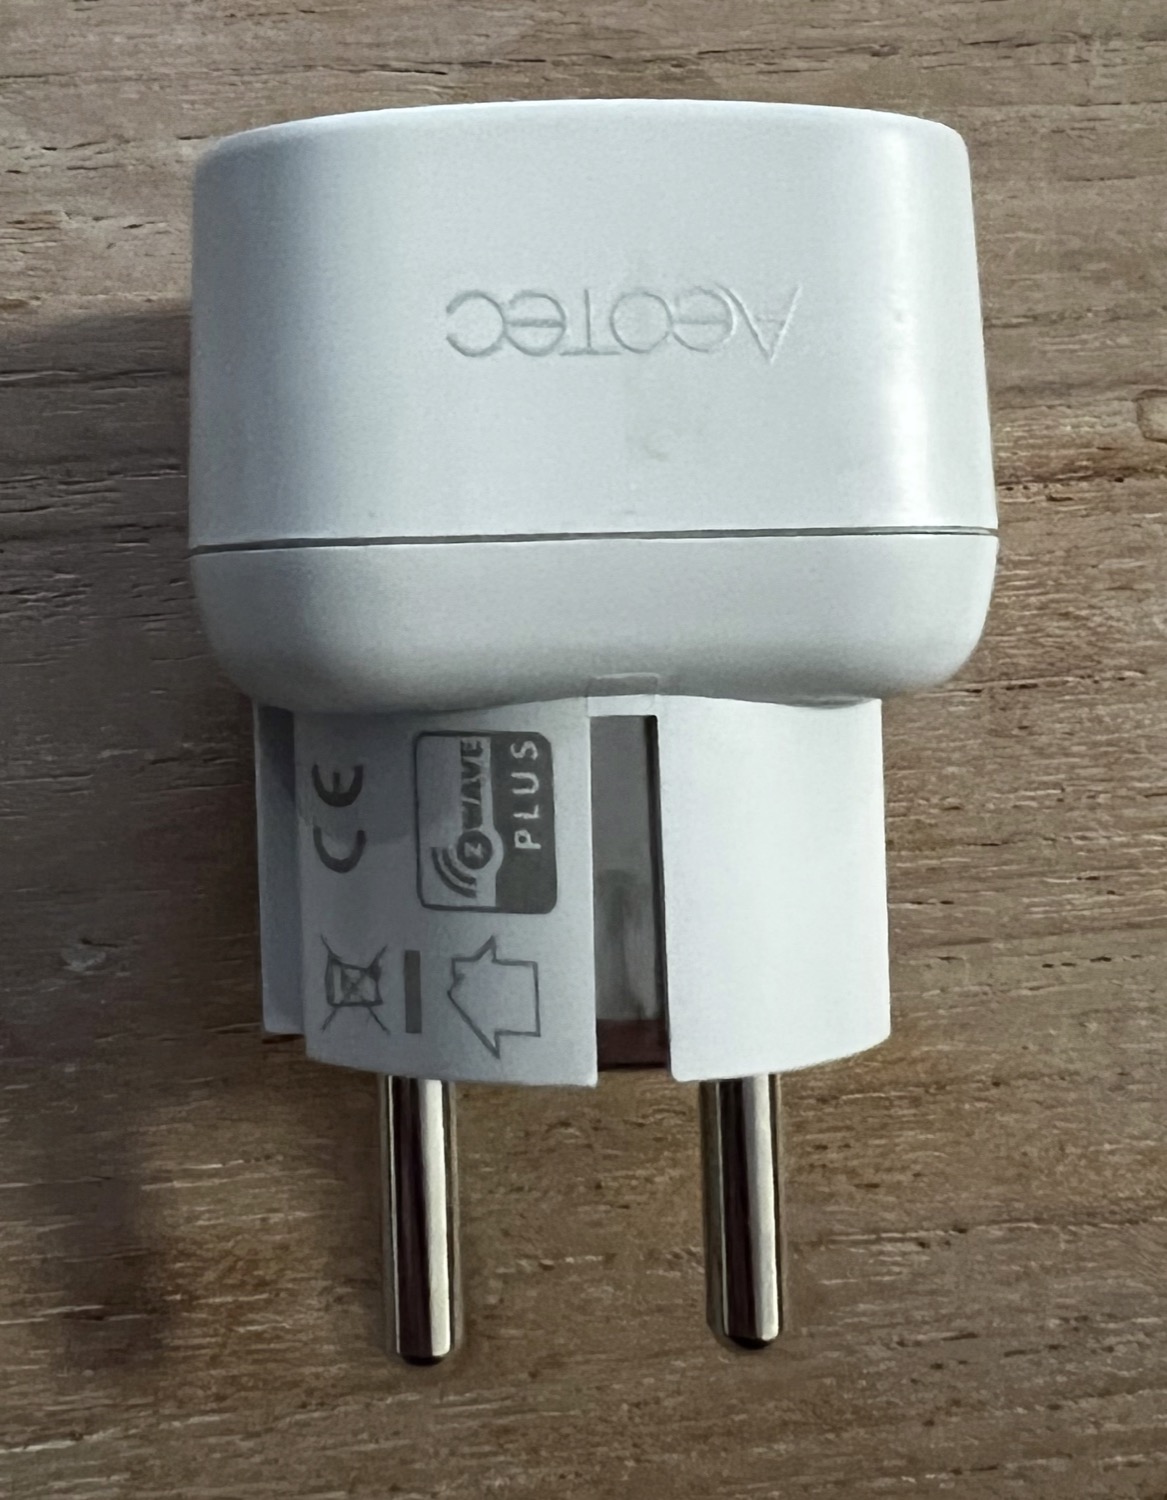 For power monitoring use-cases, I use Z-Wave power plugs like this [Aeotec Smart Switch 7](https://aeotec.com/z-wave-plug-in-switch/index.html). I use Z-Wave instead of Zigbee because Zigbee plugs with power monitoring are not as common and I've read about various reporting issues with them.